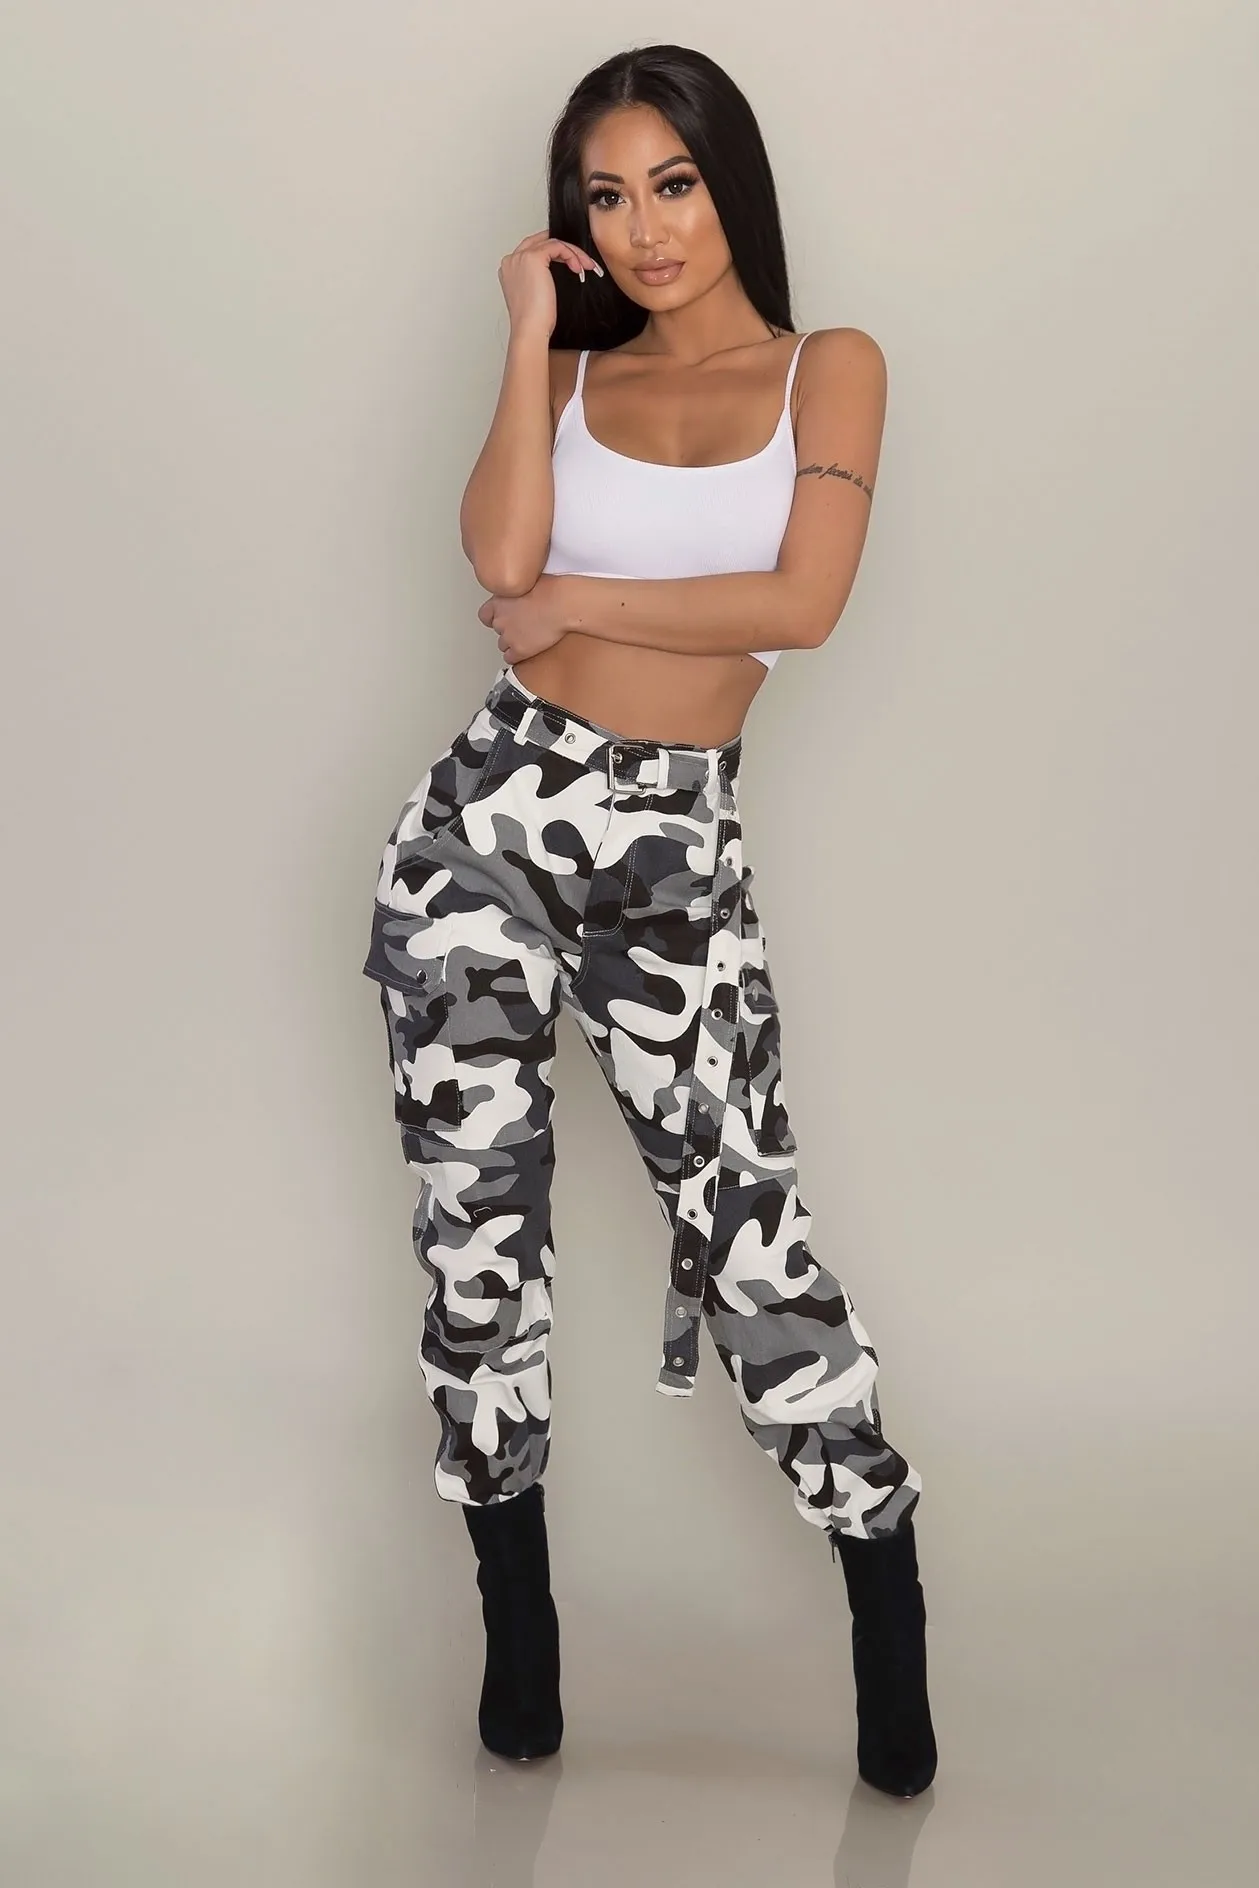 Women Camo Trousers Casual Pants Military Army Combat Plus _ - AliExpress Mobile